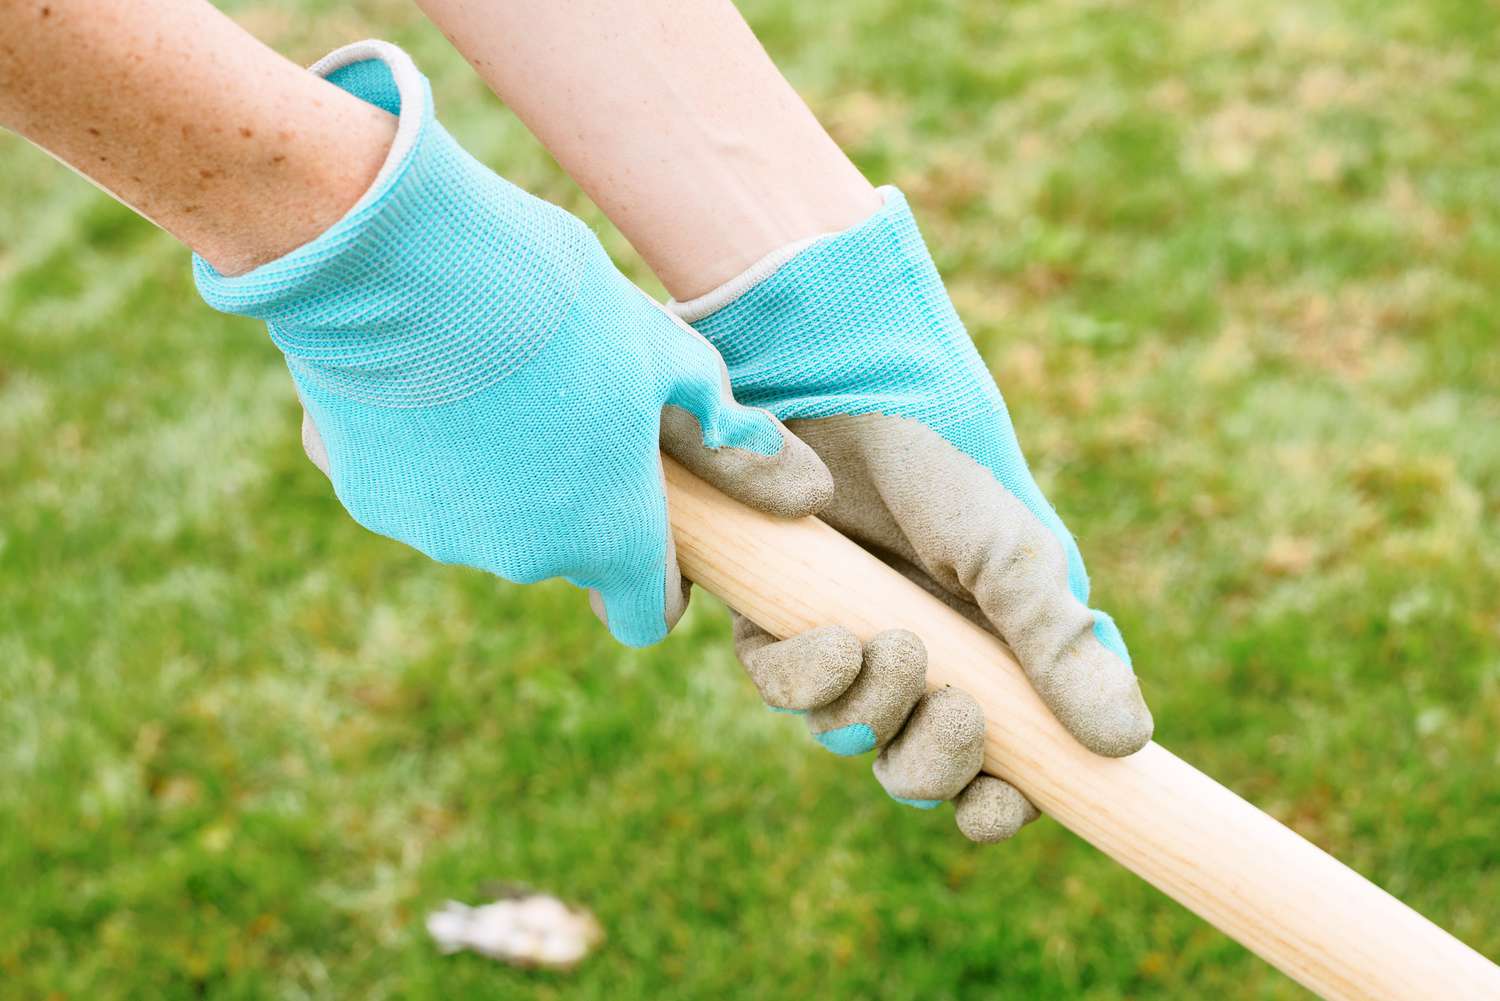 Blue and gray gloves being worn while holding on wooden handle